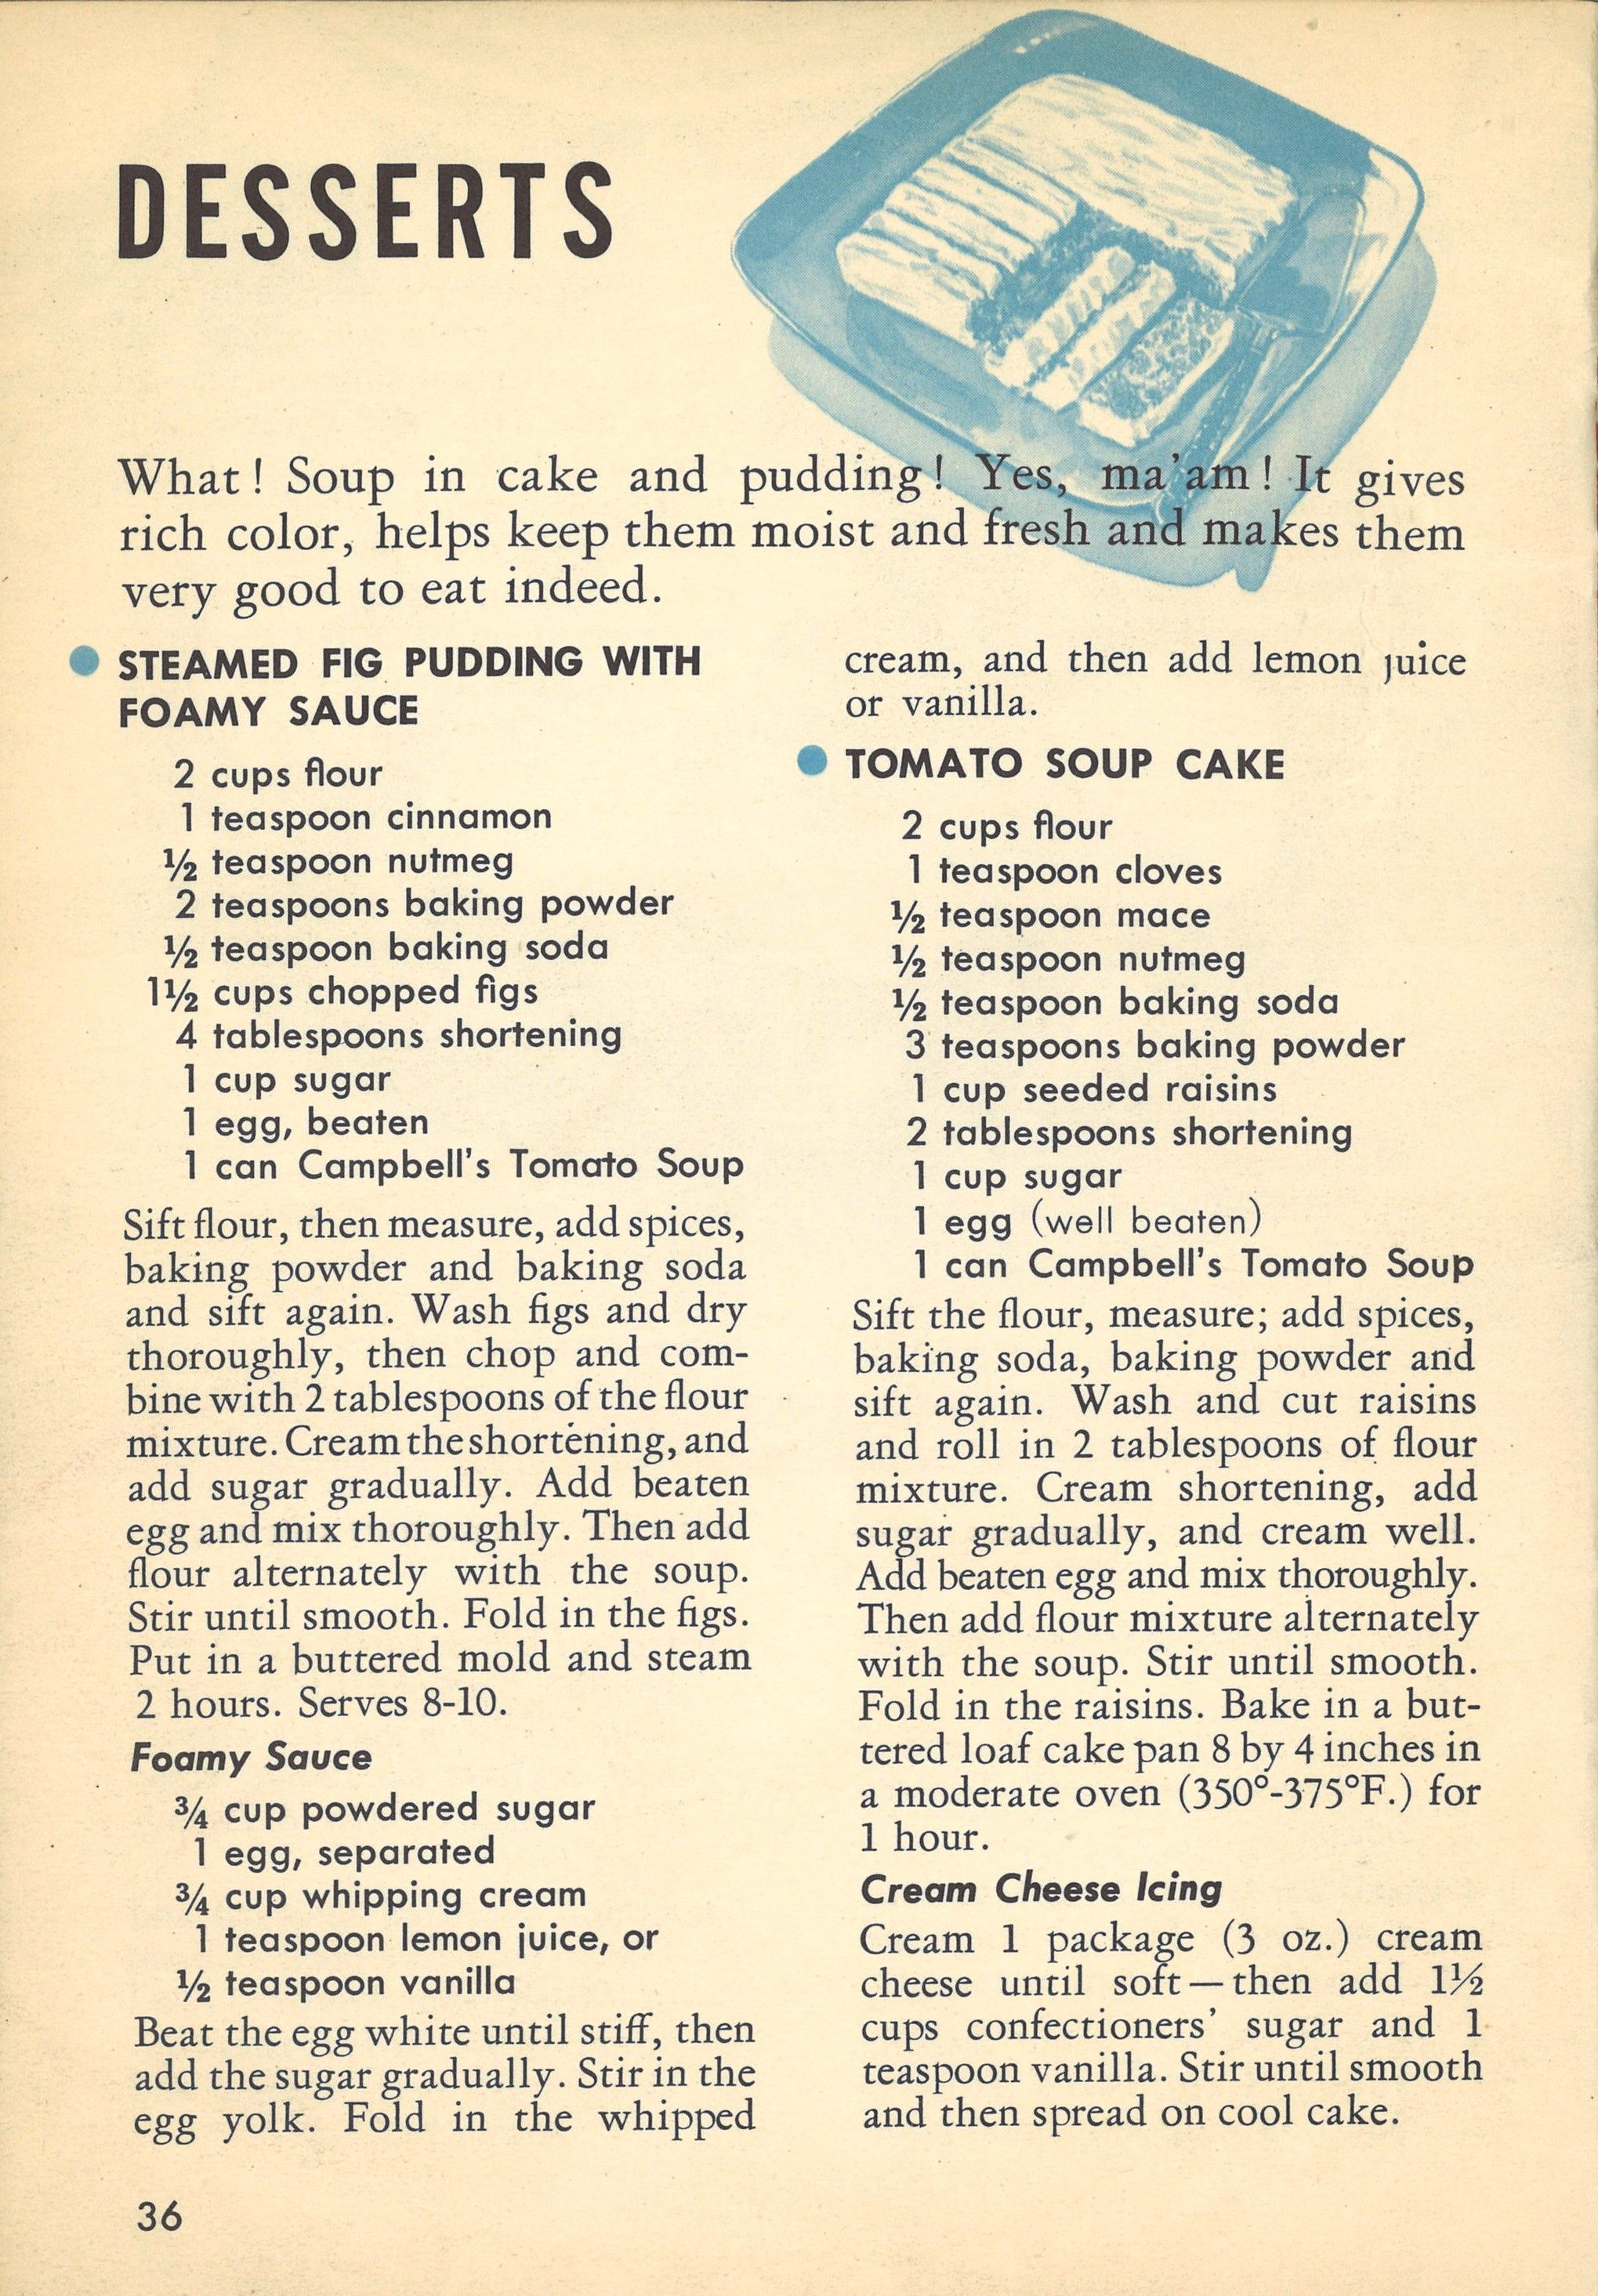 A tomato soup cake recipe from 1941.